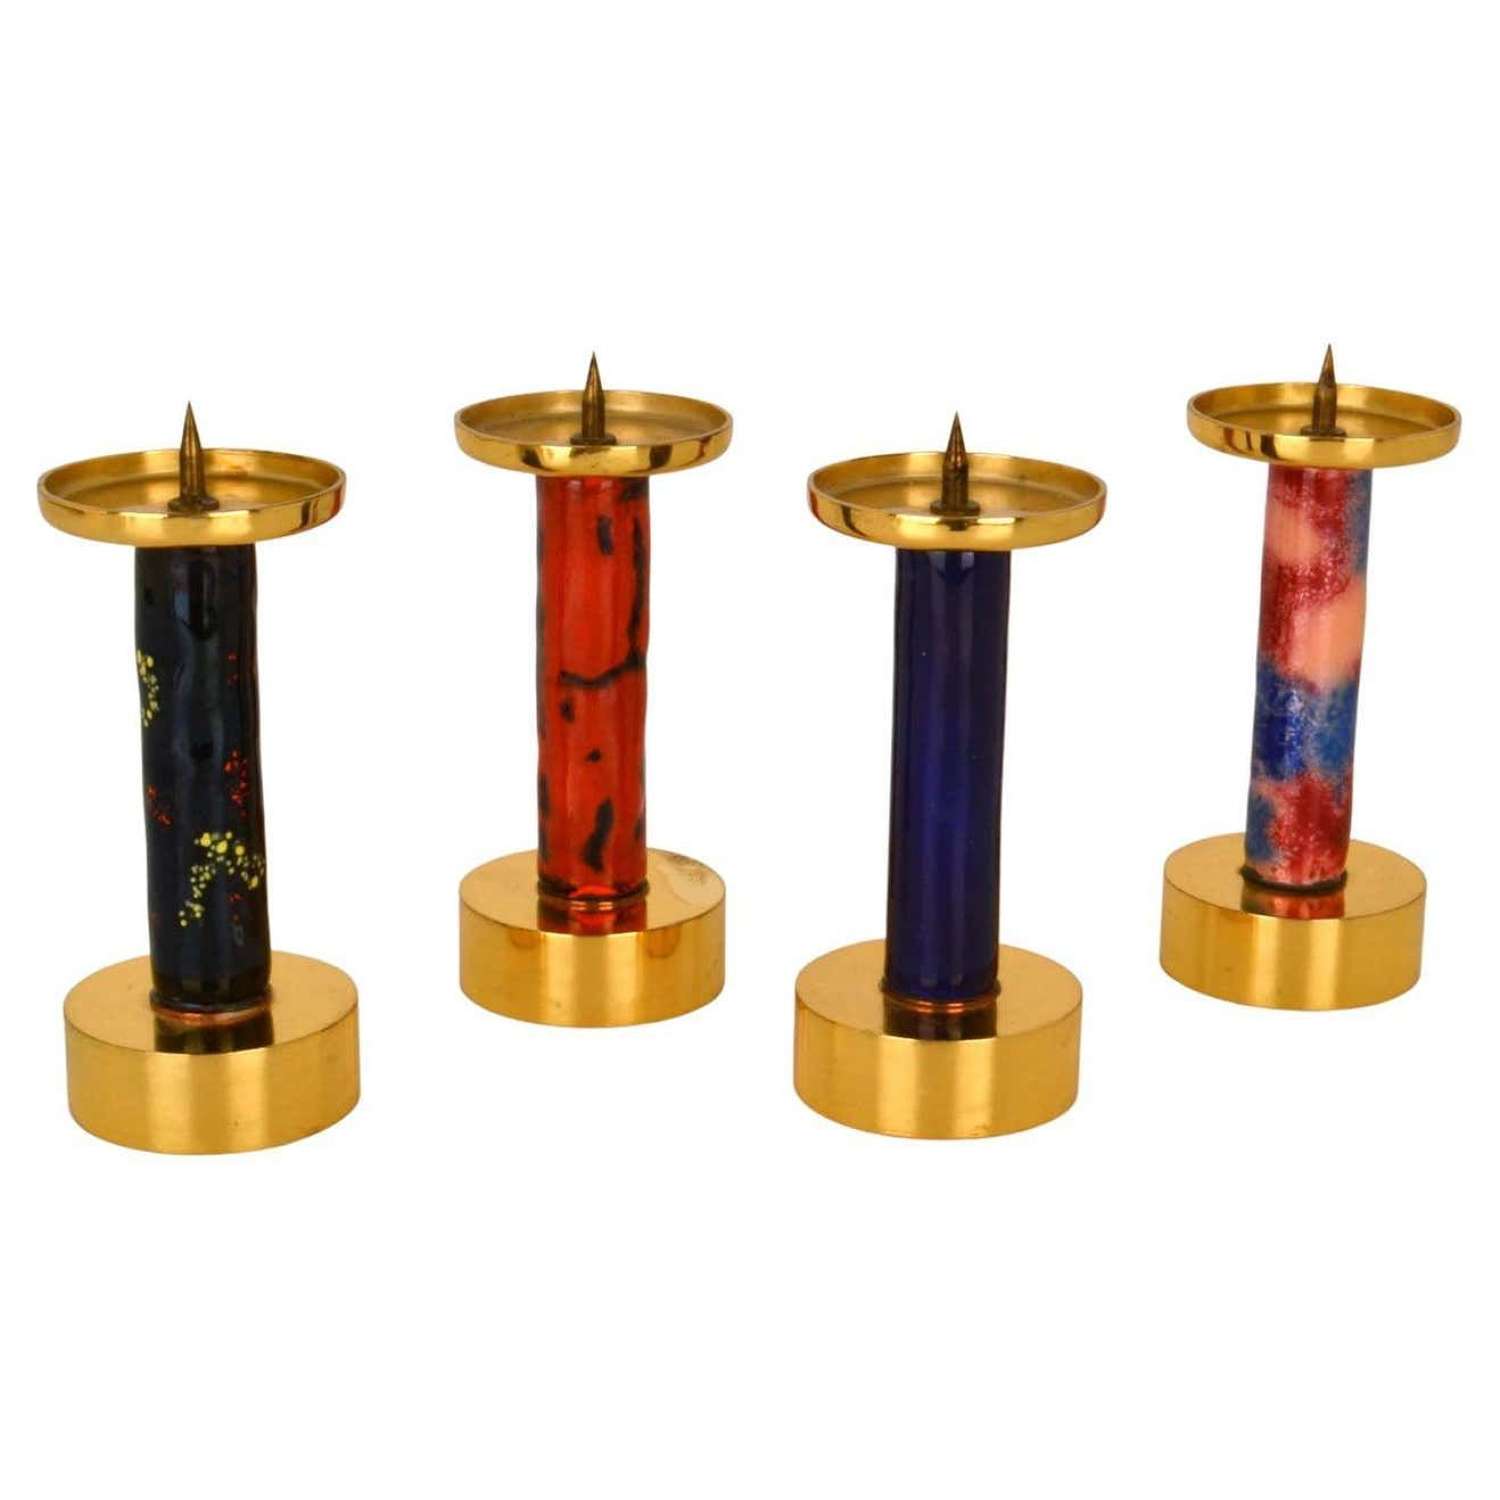 Four Enameled and Gilded Brass Candle Sticks